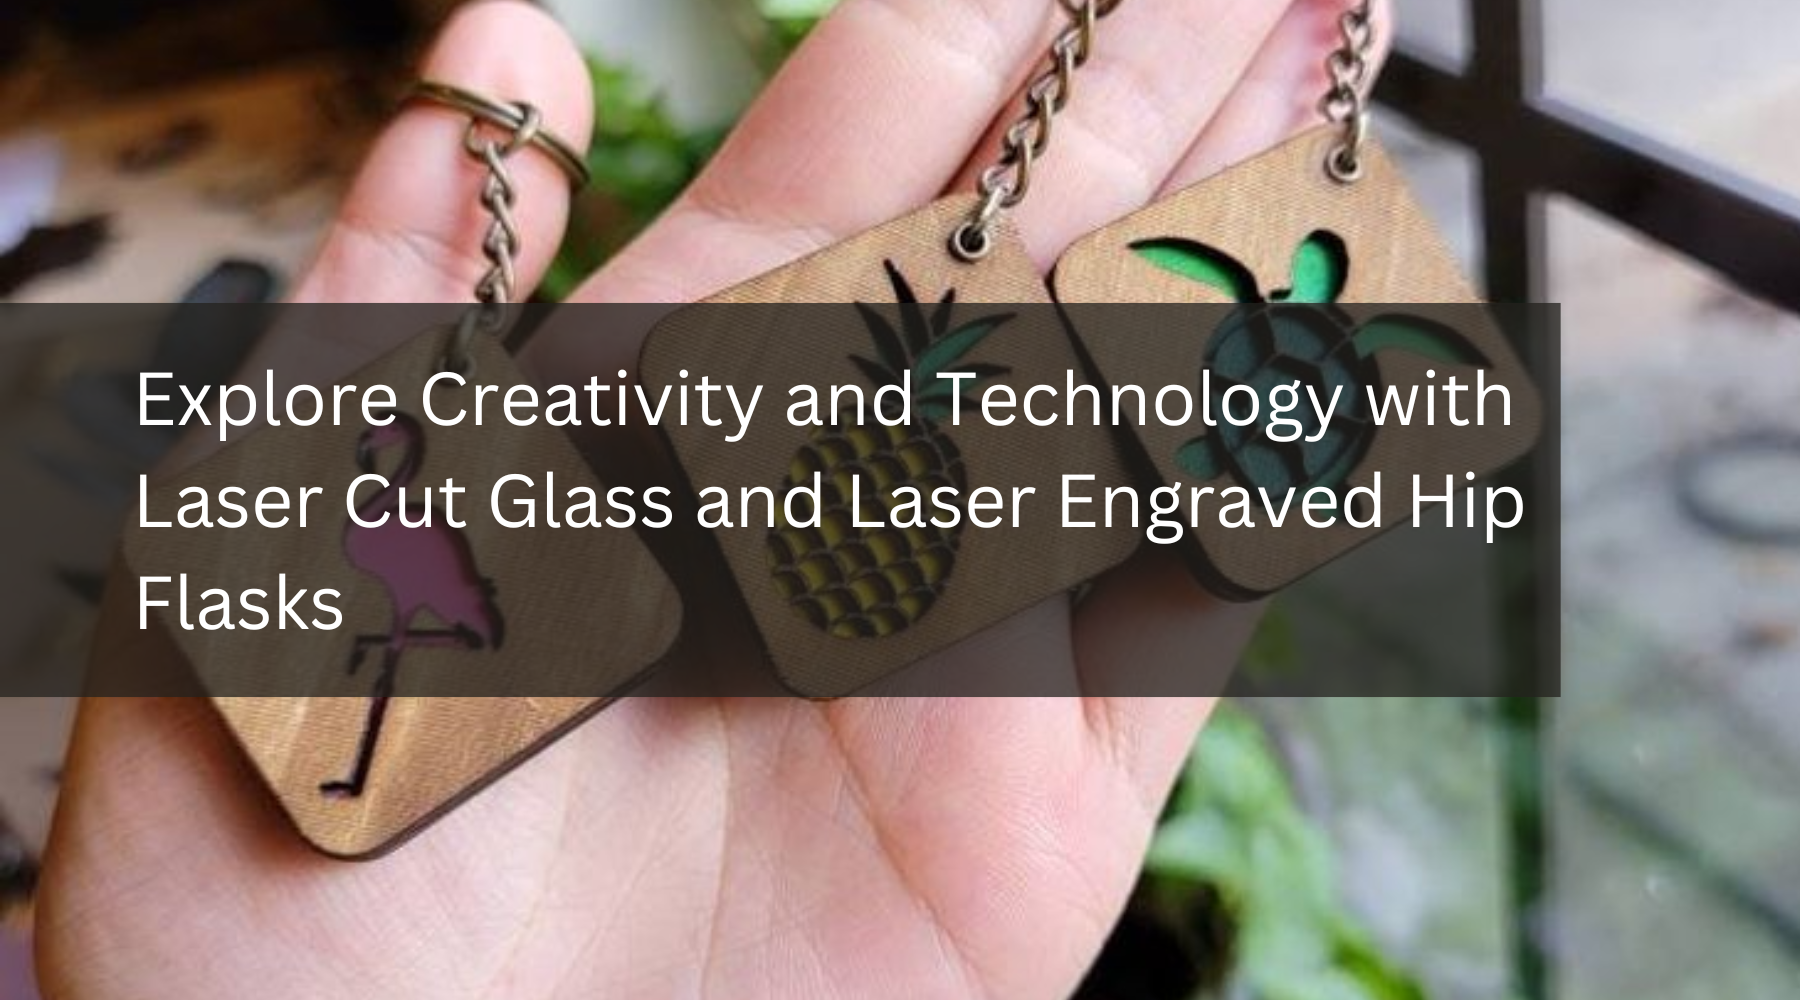 Explore Creativity and Technology with Laser Cut Glass and Laser Engraved Hip Flasks